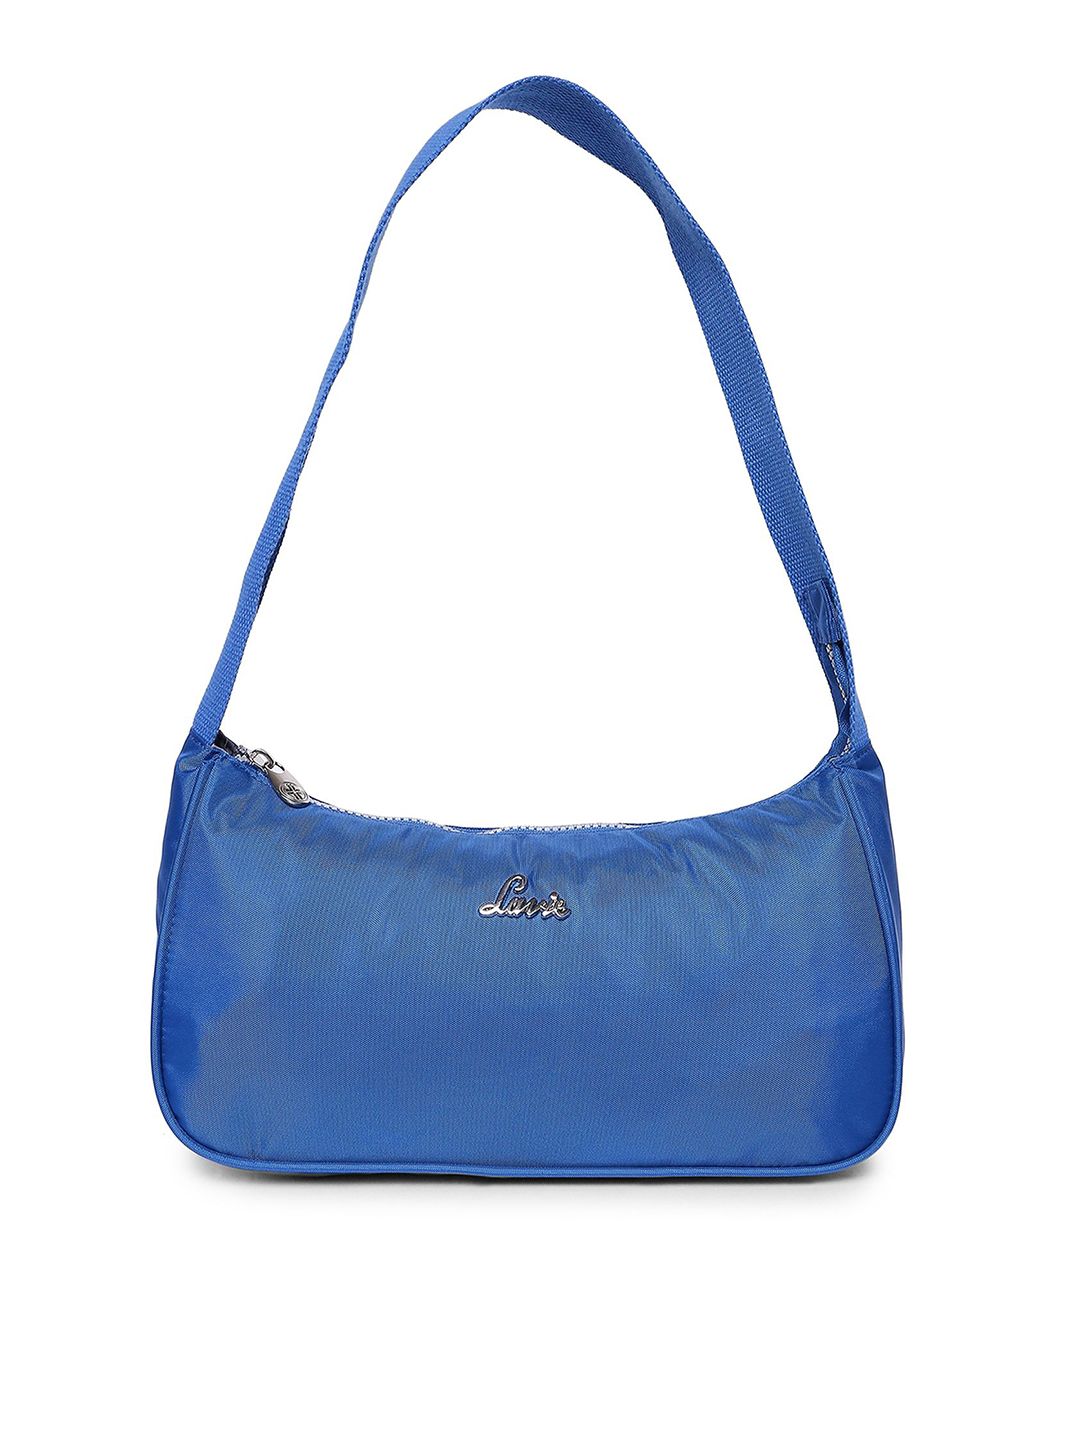 Lavie Blue Solid PU Small Structured Shoulder Bag Price in India